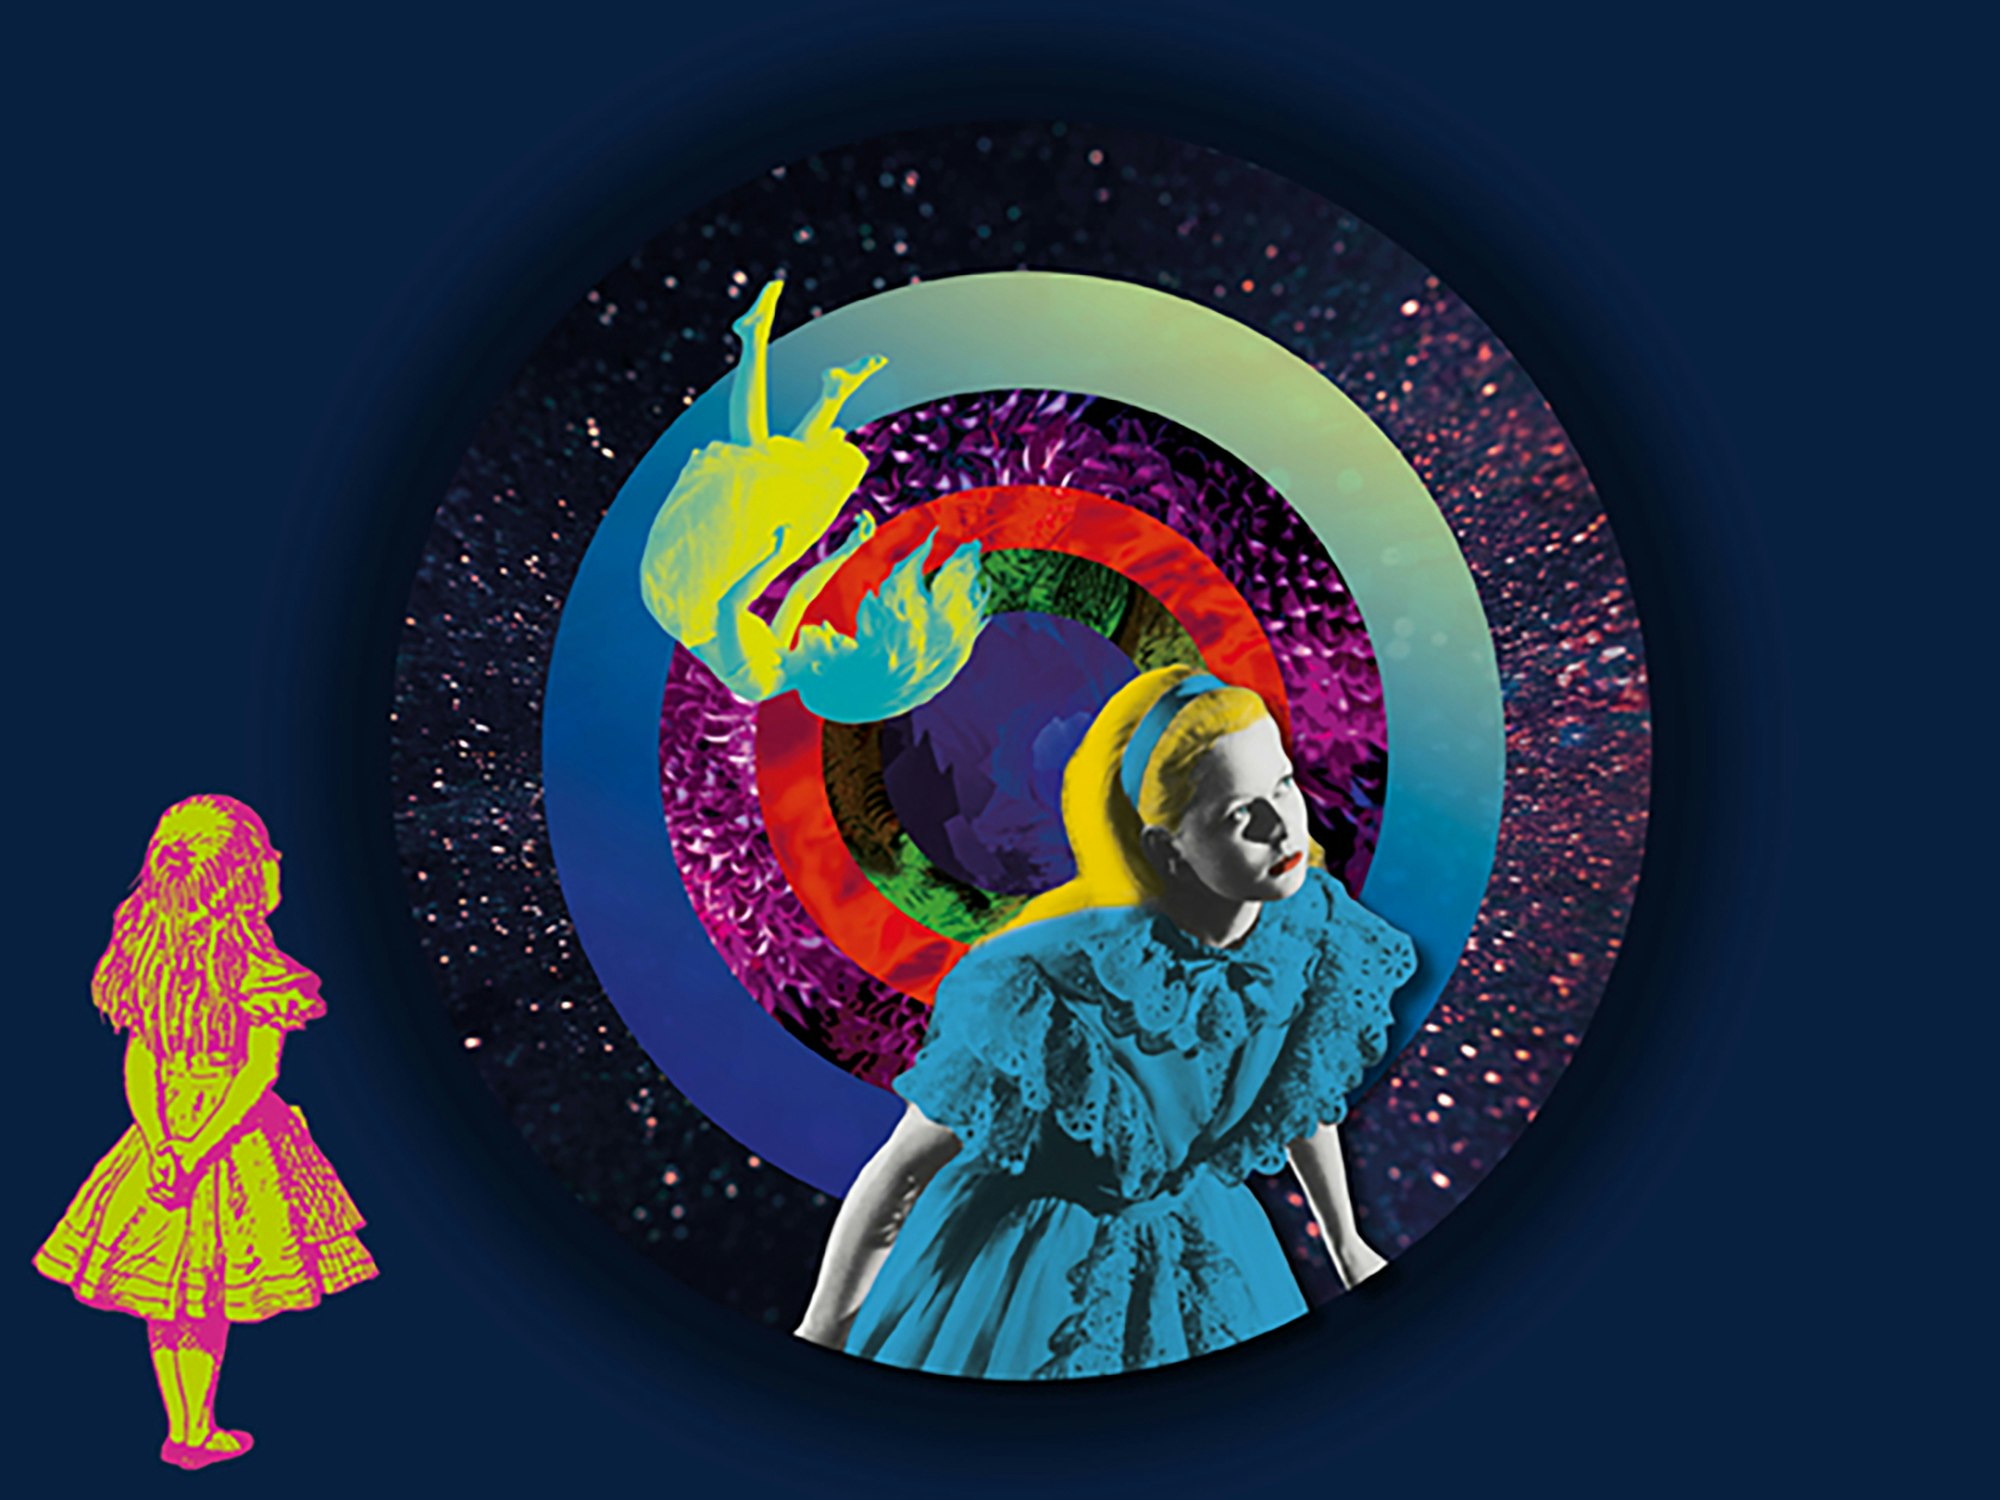 The next Wonderland Low Sensory Exhibition Visits are open on 2nd June 2018 and 15th July 2018 [Source: ACMI] 
